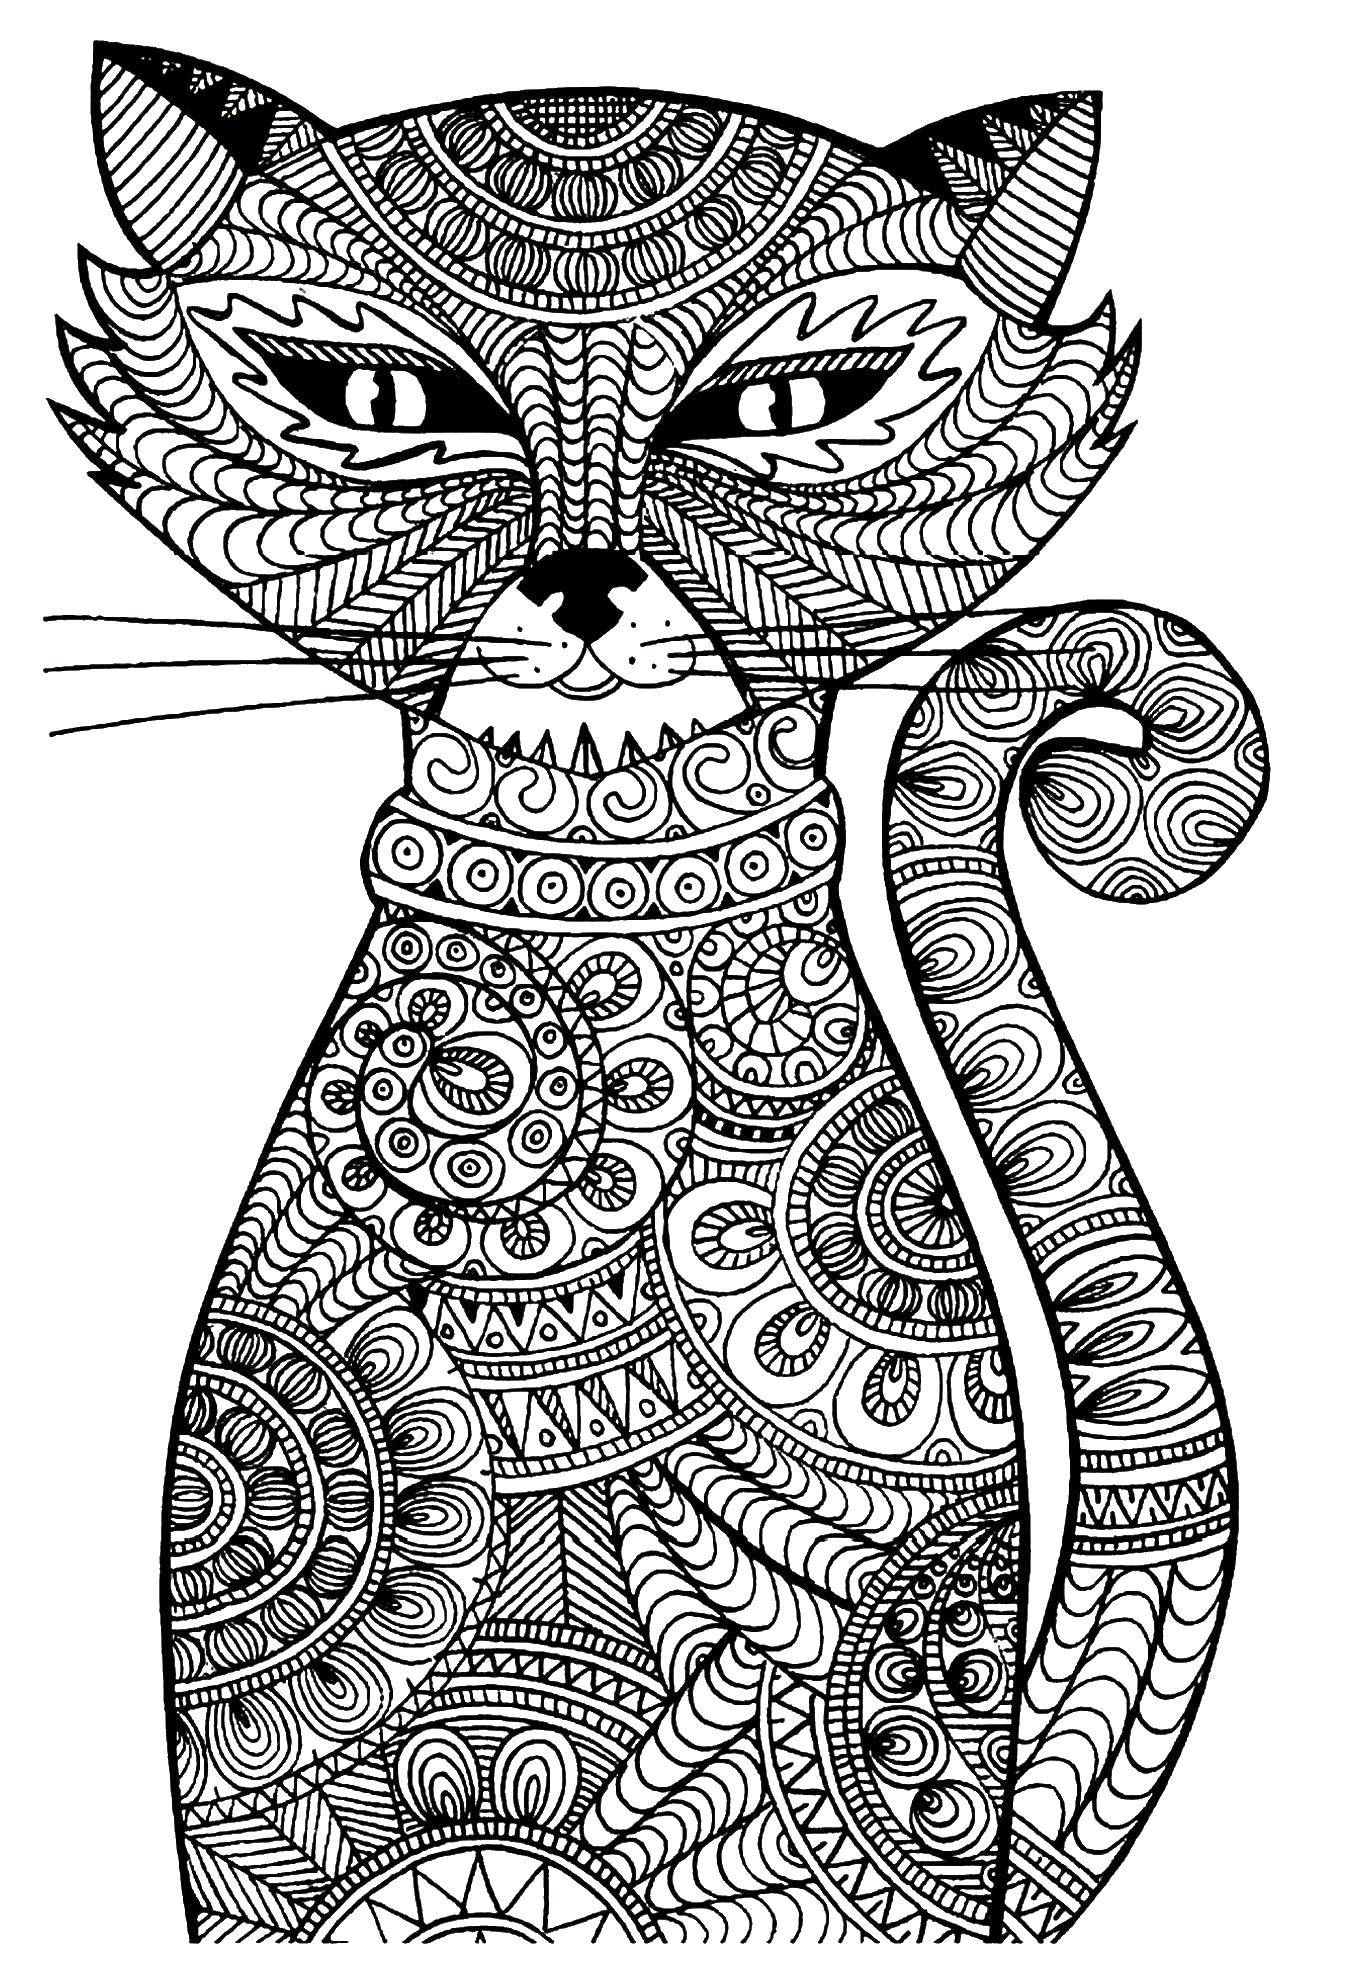 Coloring The cat in the patterns. Category For teenagers. Tags:  cat, patterns, flowers.